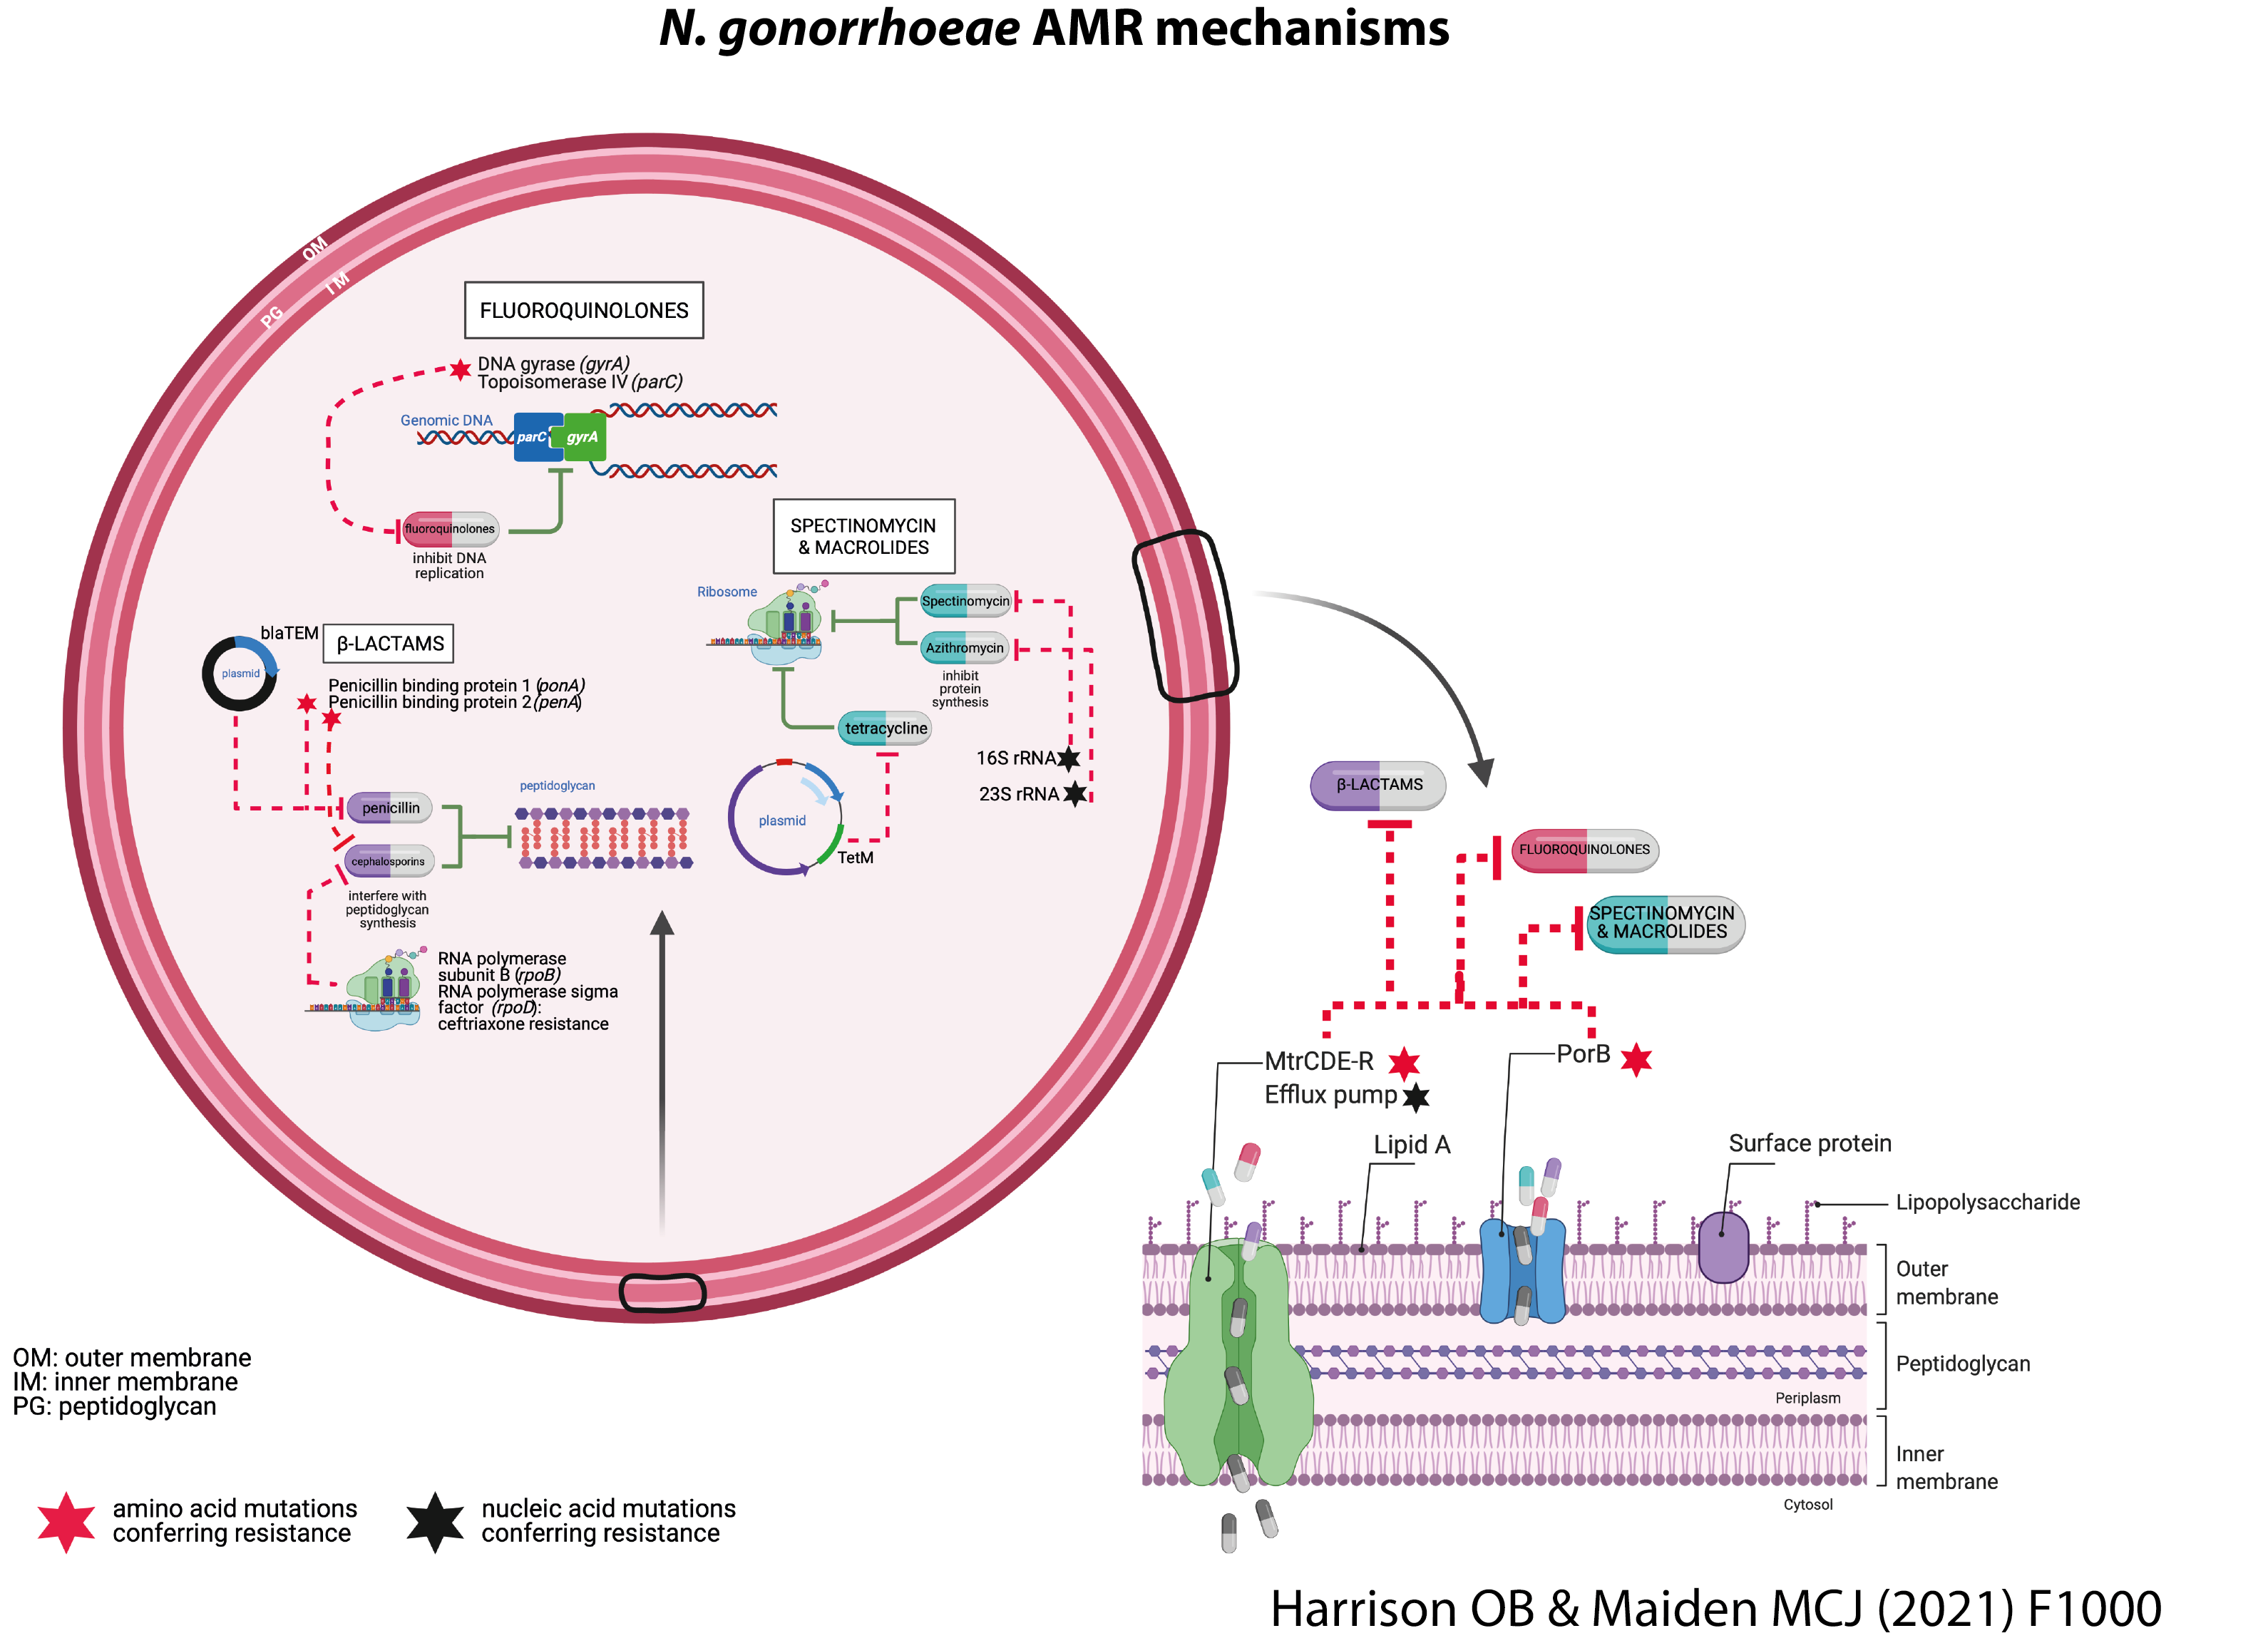 Gonococcal cell with AMR mechanisms depicted